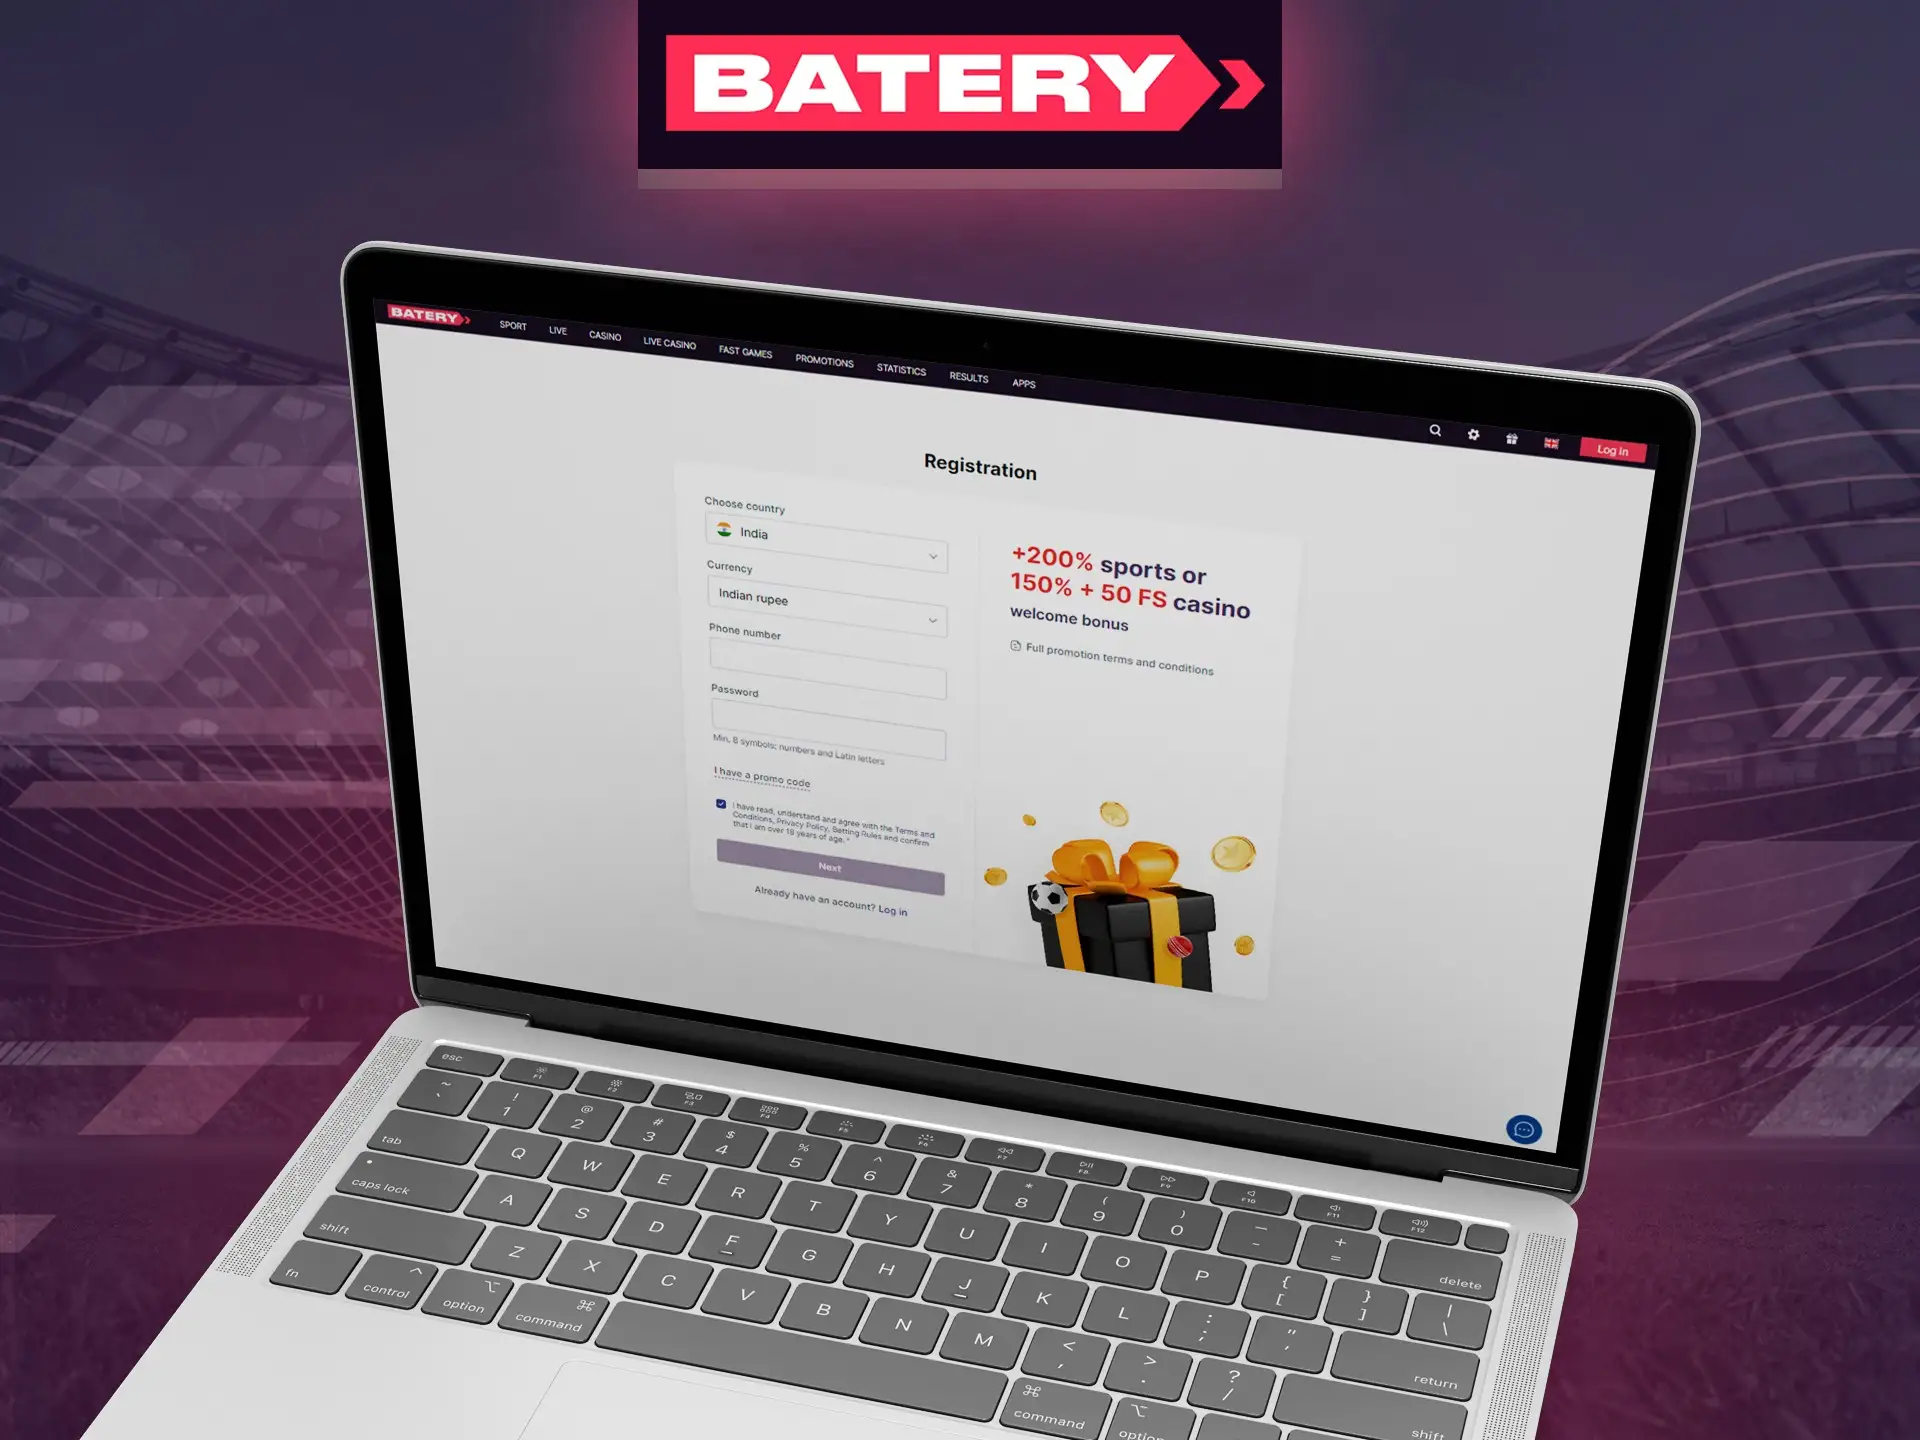 Register your Batery account by clicking on register button.